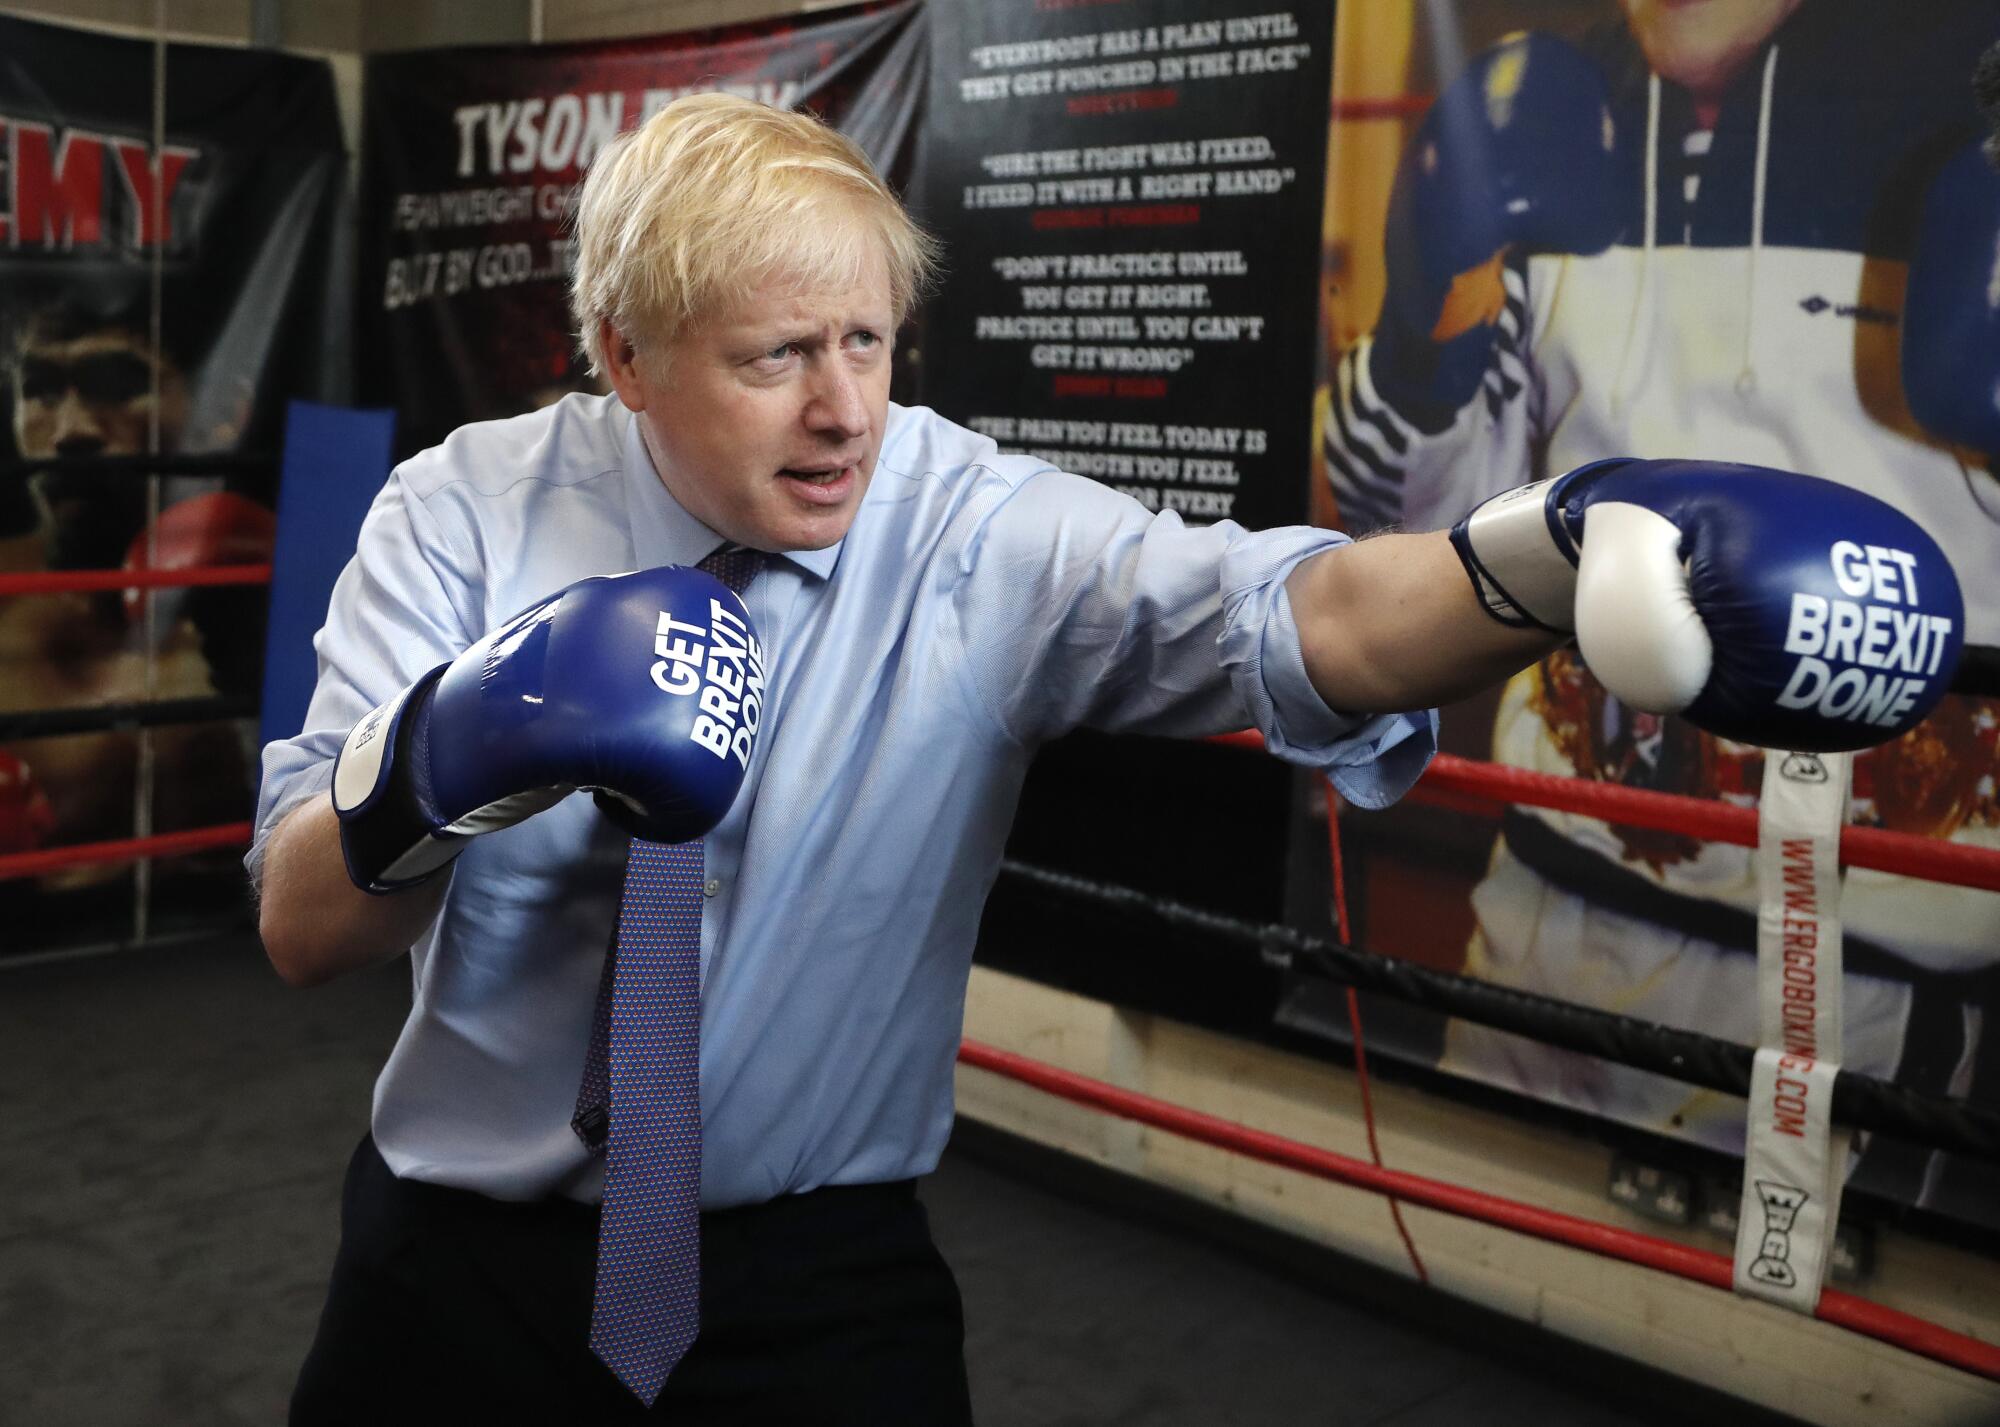 Britain's Prime Minister Boris Johnson poses for a photo wearing boxing gloves during a stop